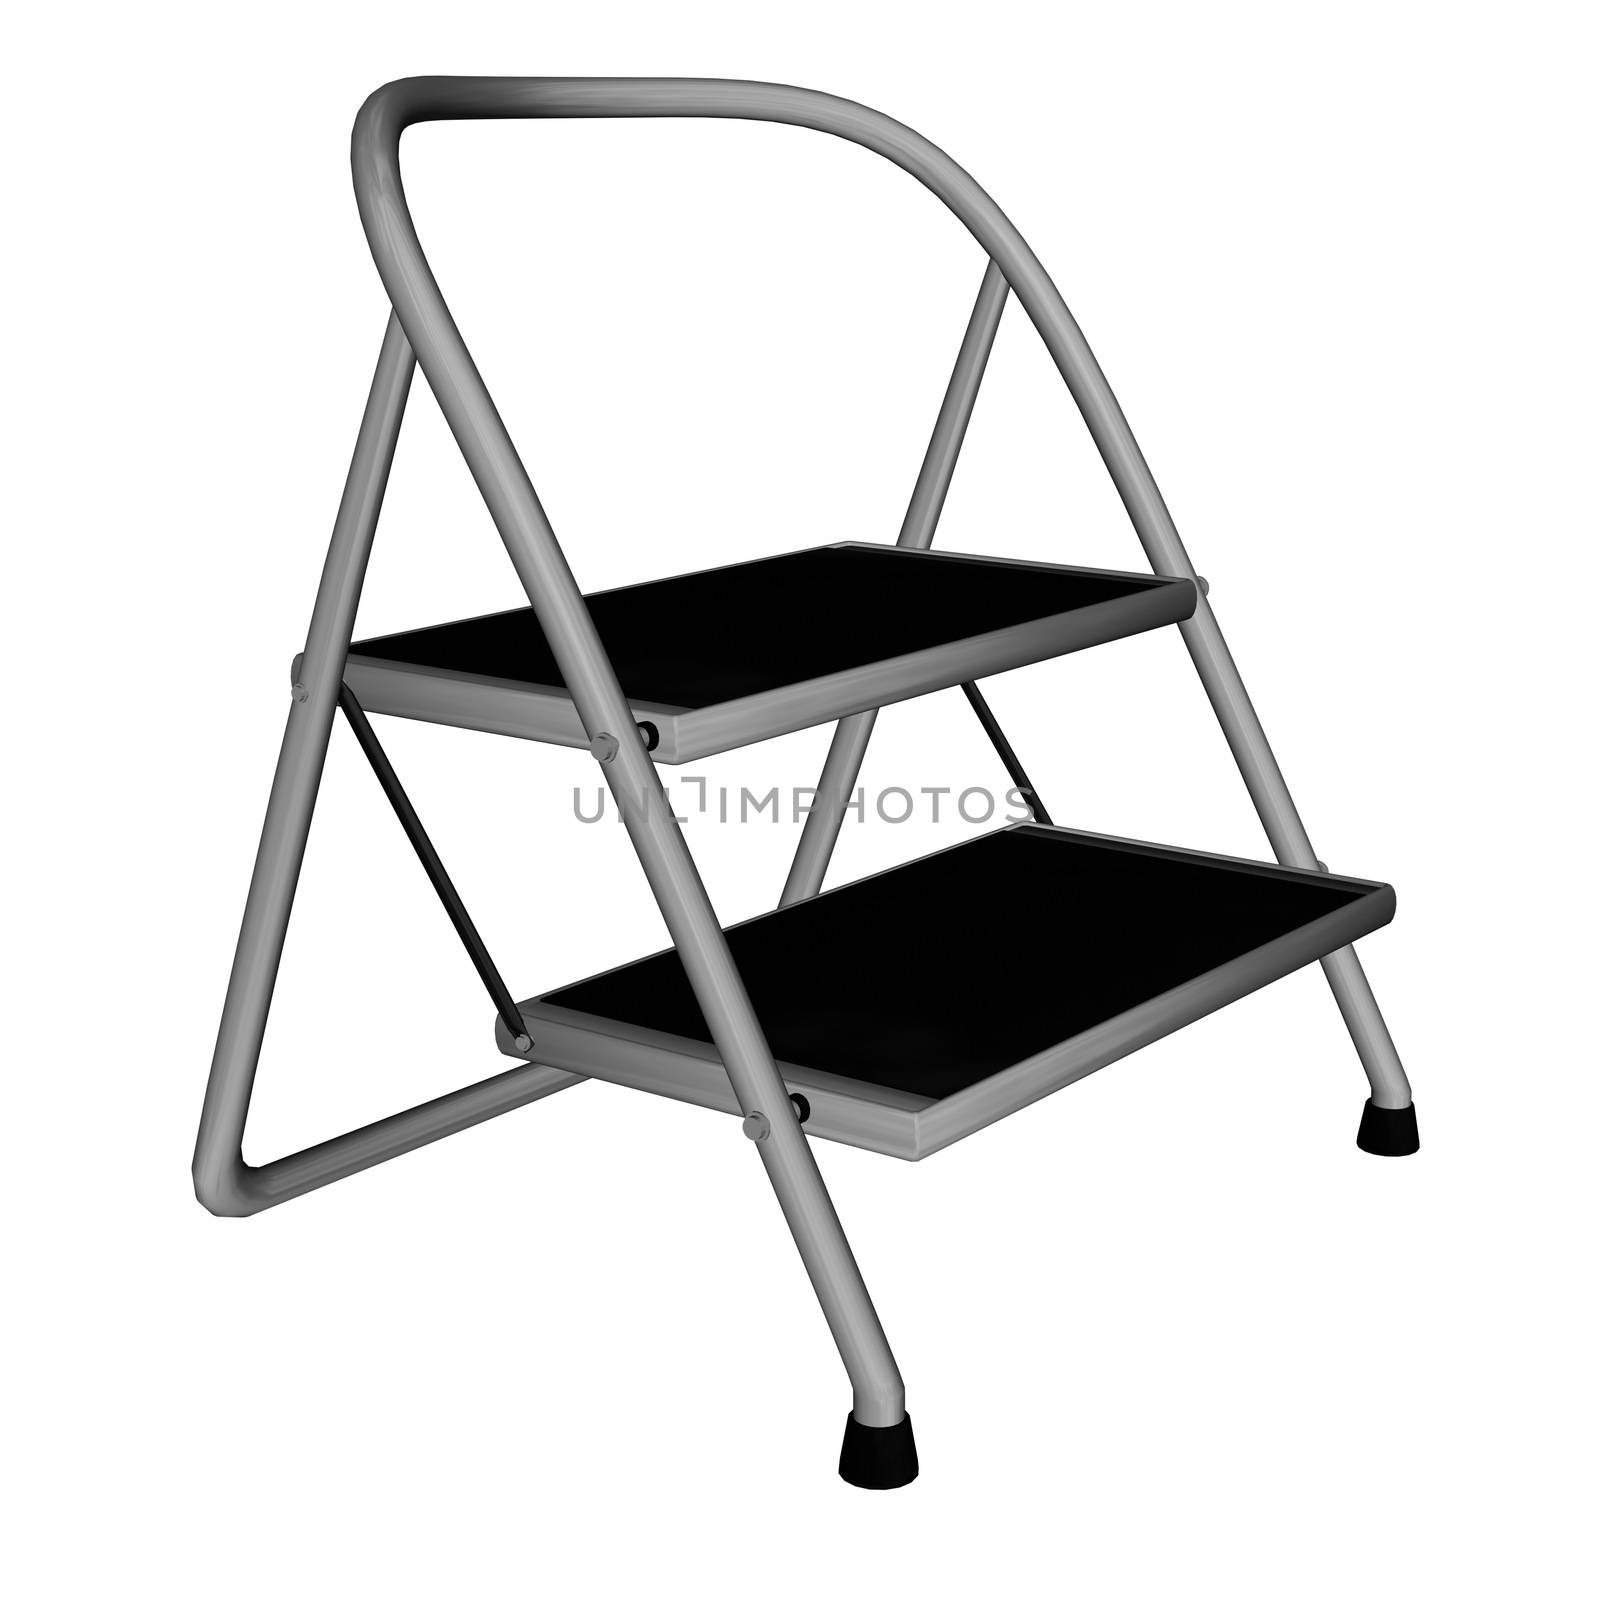 Stepladder isolated - 3D render by Elenaphotos21